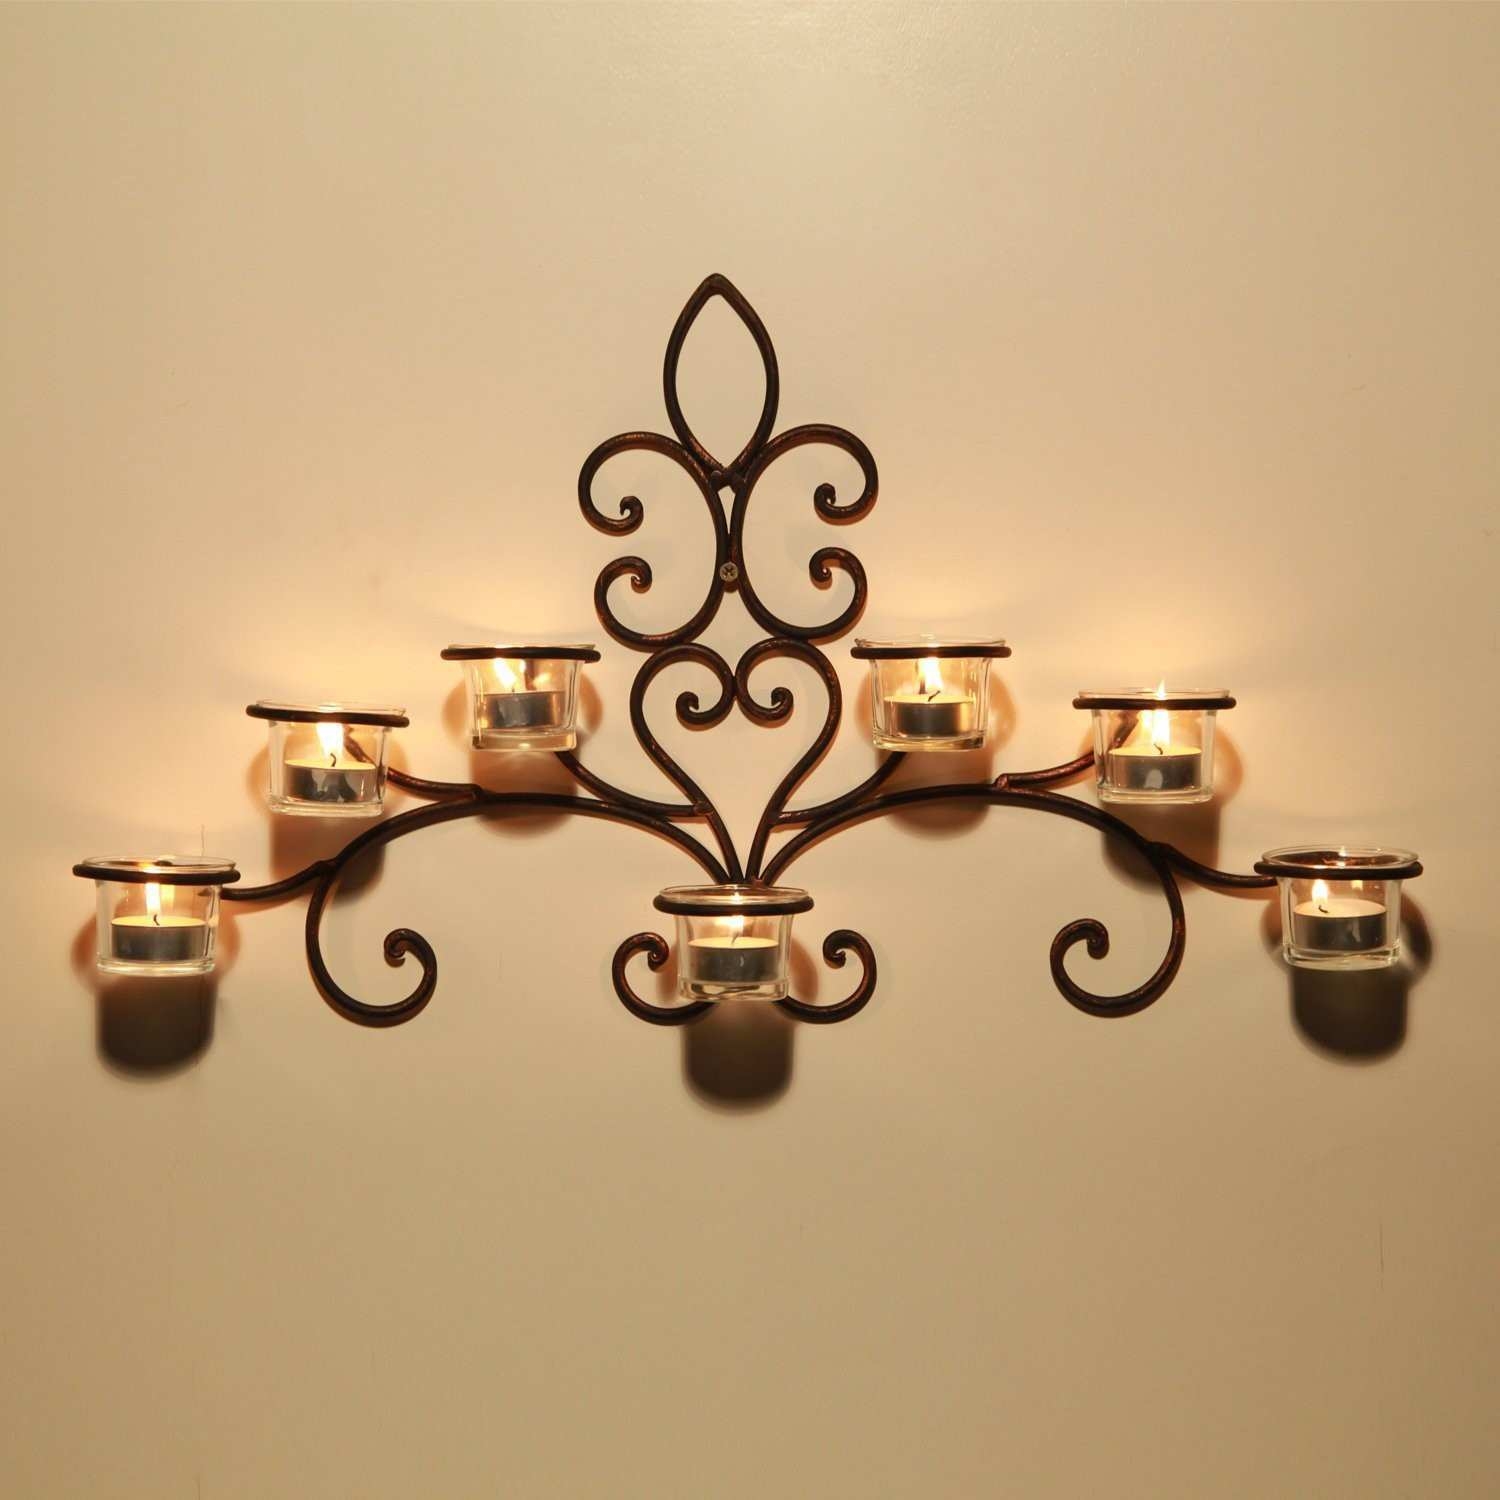 Hanging Metal Wall Candle Holder,Wall Sconces Decor for Bedroom Dining Room Living Room Bathroom Gold,size:1PCS Iron Wall Candle Sconces 